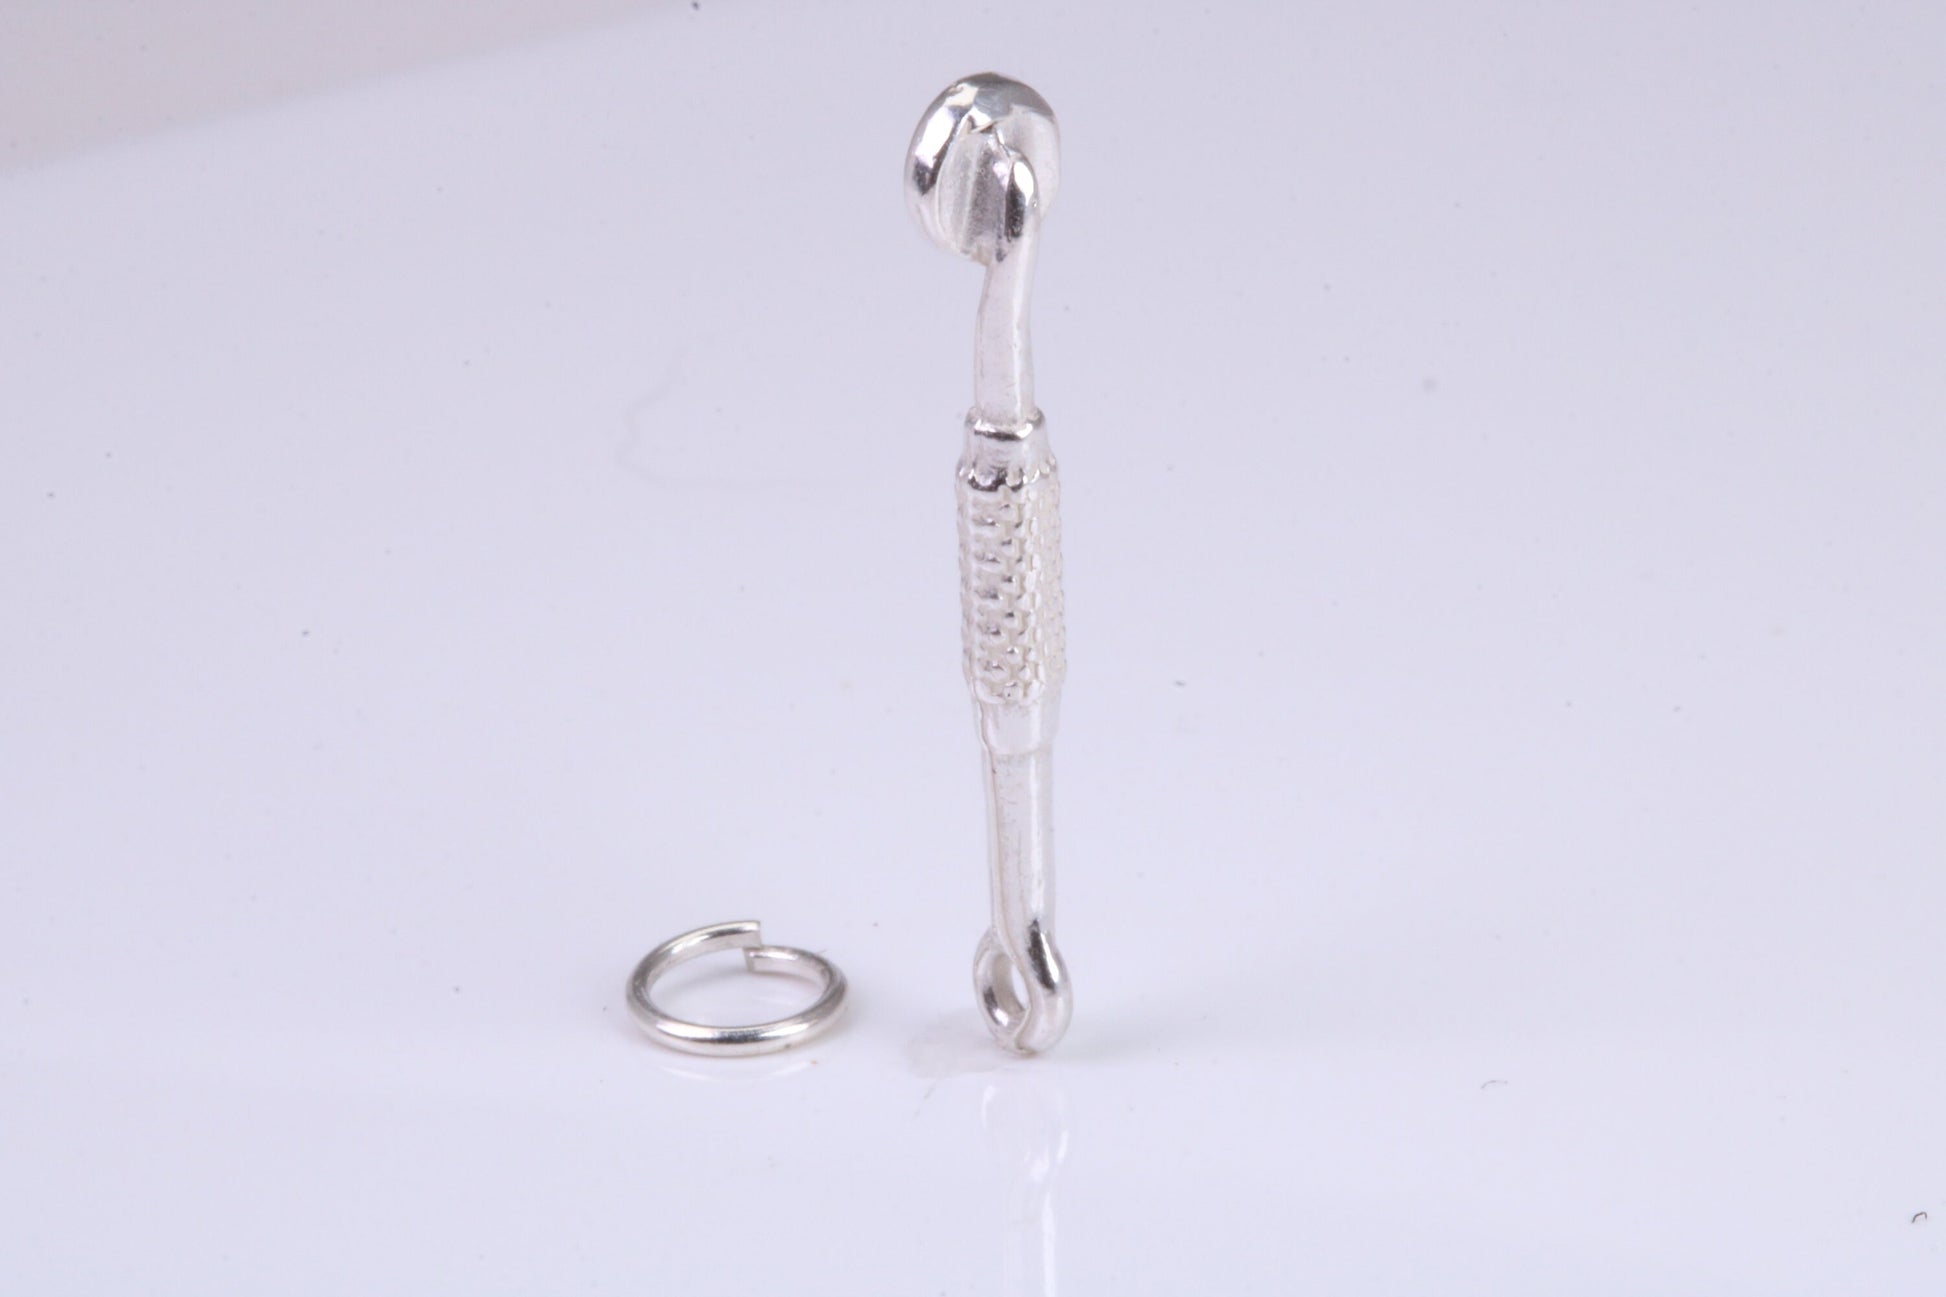 Dental Mirror Charm, Traditional Charm, Made from Solid 925 Grade Sterling Silver, Complete with Attachment Link